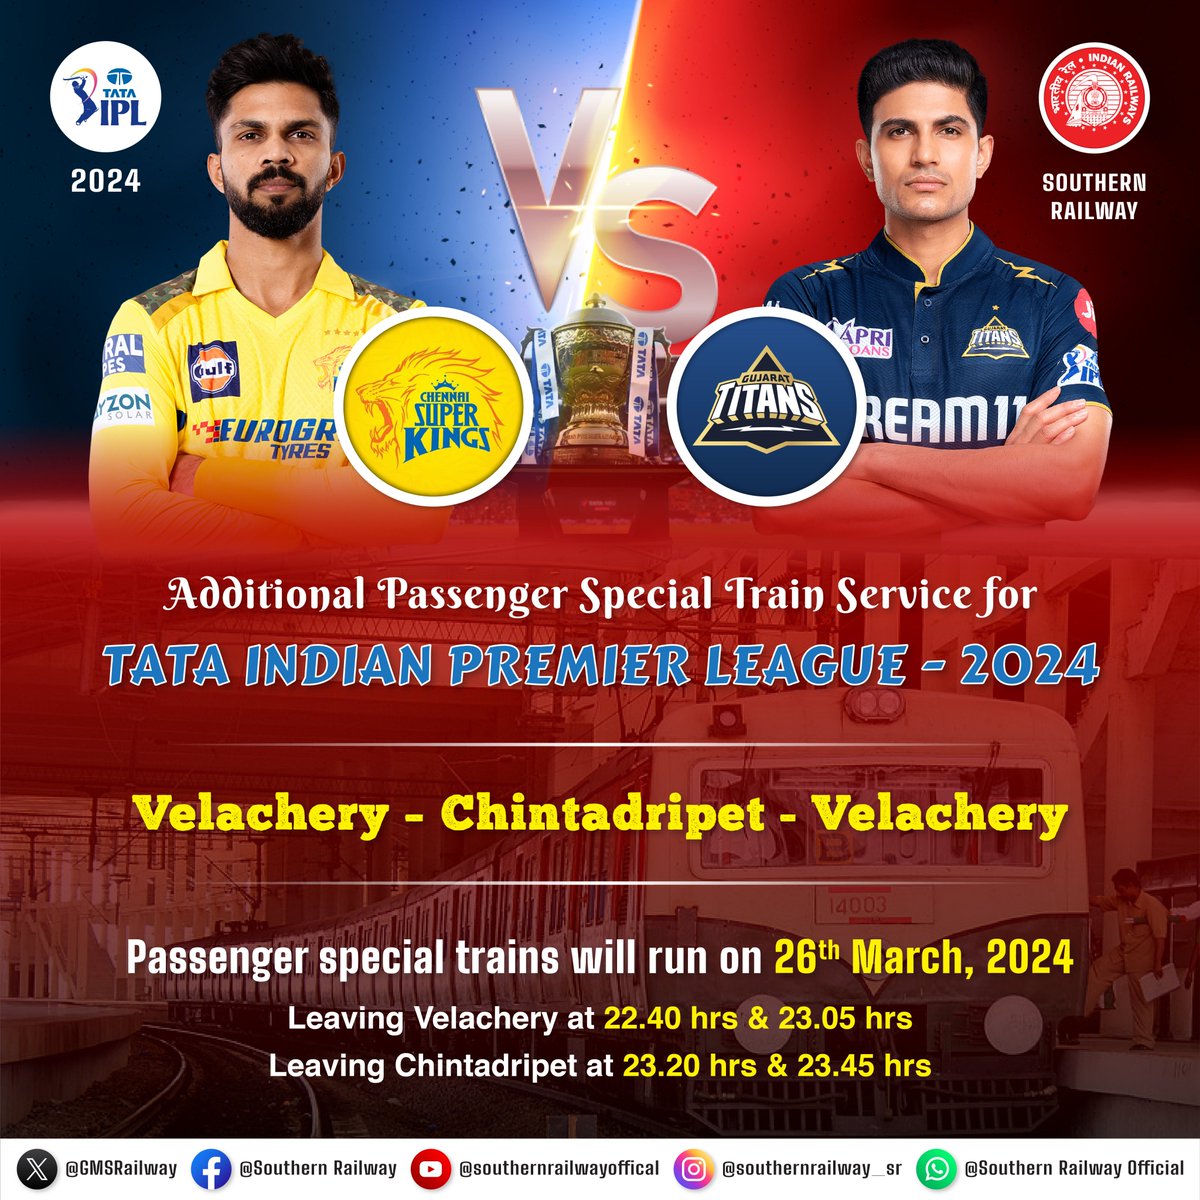 #SpecialTrain service for #TATAIPL fans!

Now you can easily commute between #Velachery and #Chintadripet after the match on March 26th. (Departs Velachery: 10.40 PM & 11.05 PM | Departs Chintadripet: 11.20 PM & 11.45 PM)

#IPL2024 #Cricket #T20 #SouthernRailway #IPLUpdate